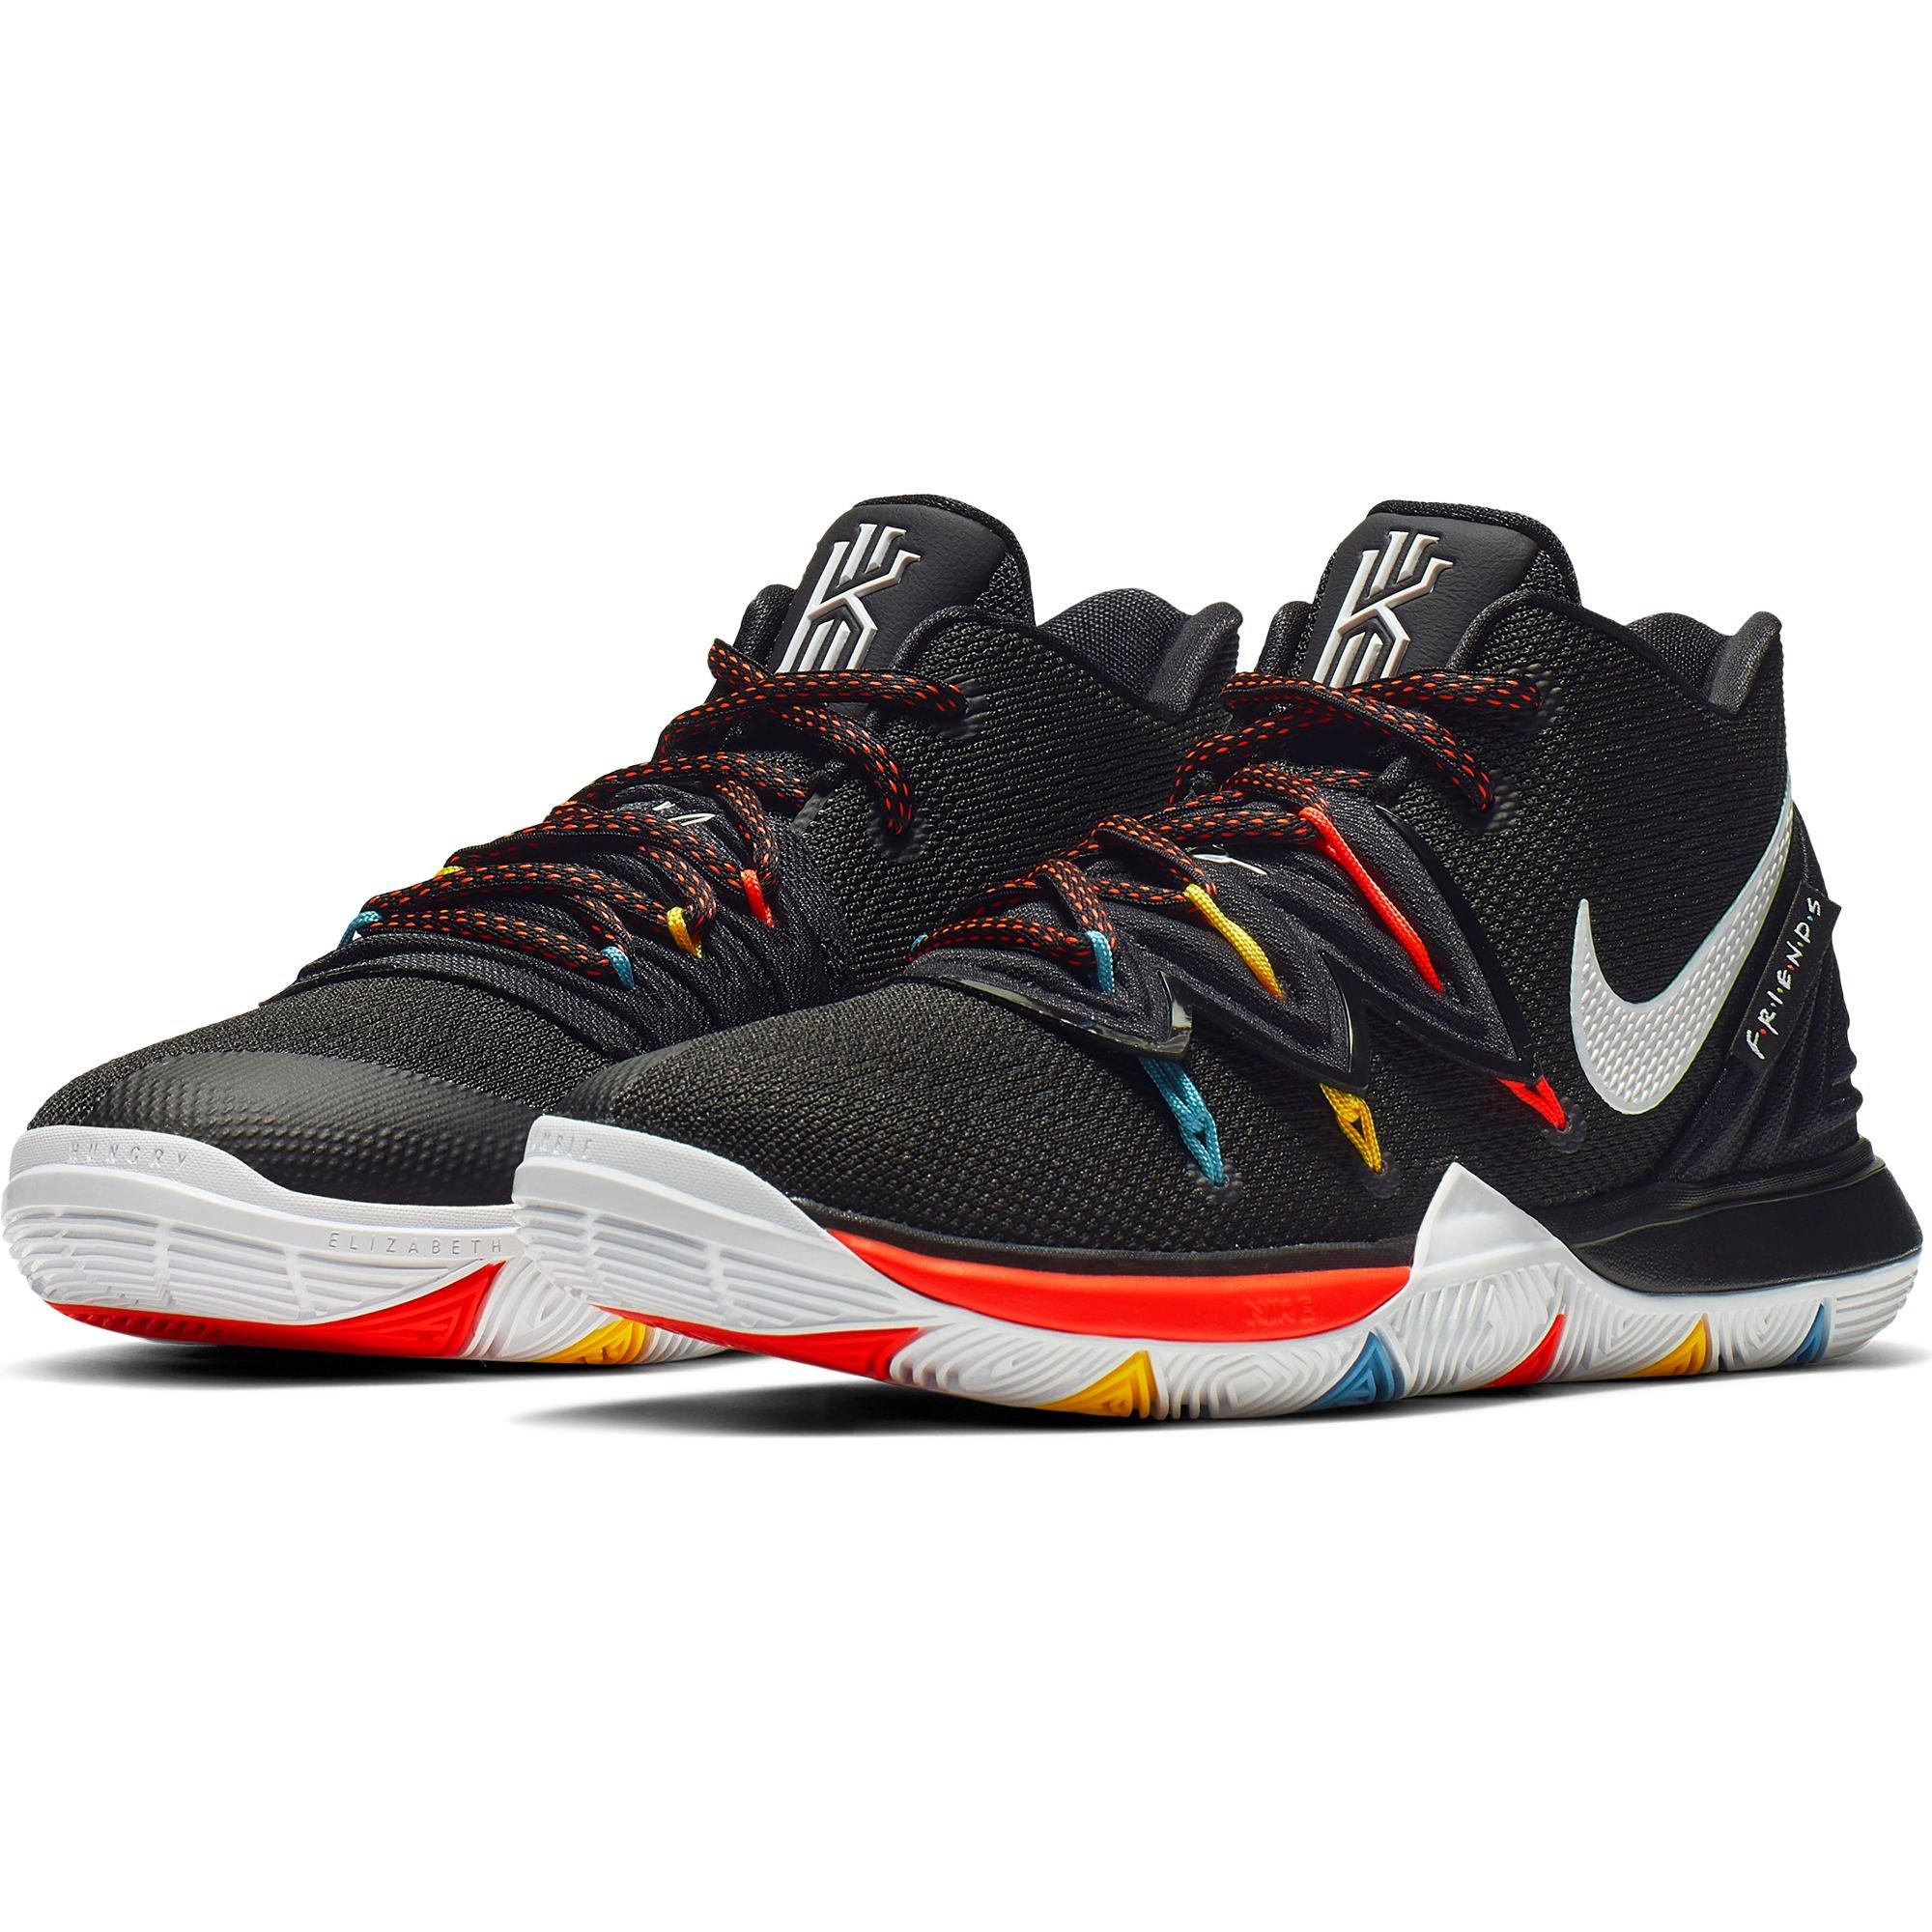 Nike Kyrie 5 EP Black Fluorescent Green Shoes Best Price